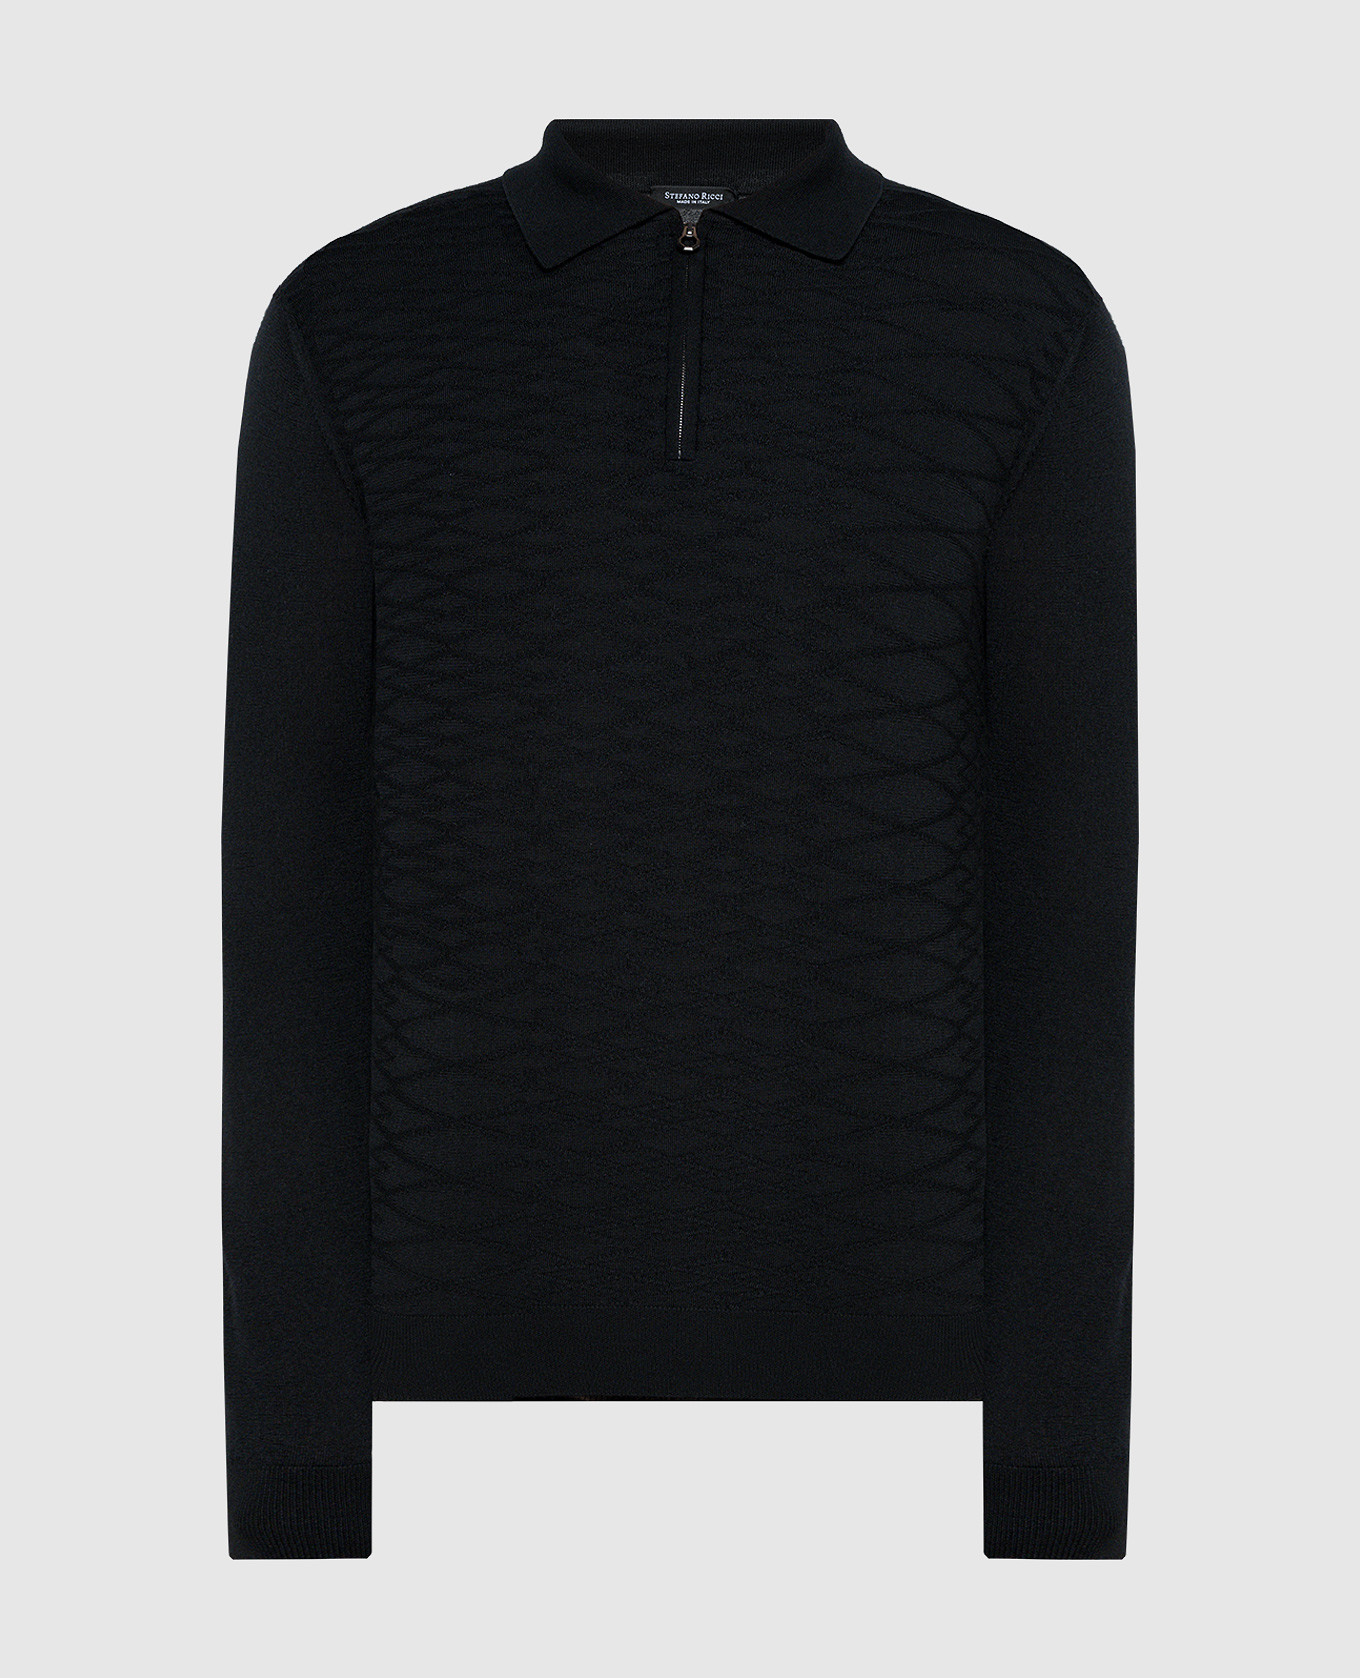 Black polo in cashmere and silk with a textured pattern and logo